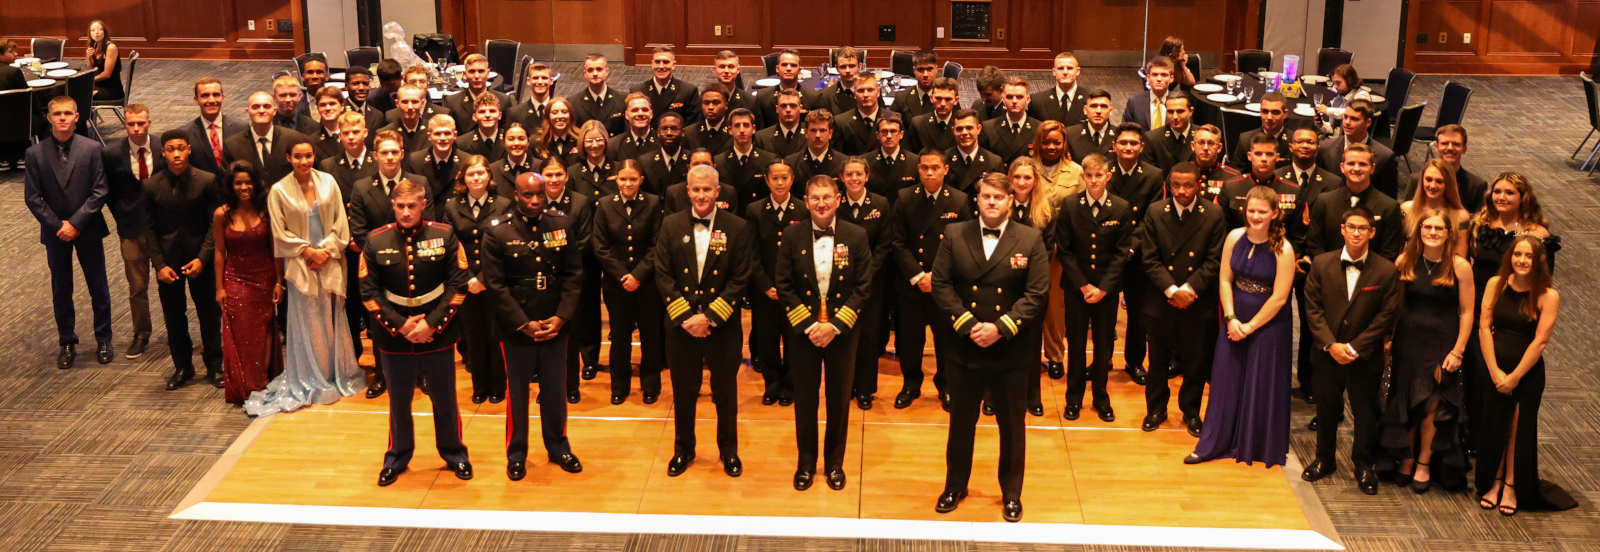 Find out what it takes to be eligible for enrollment as an NROTC Midshipmen